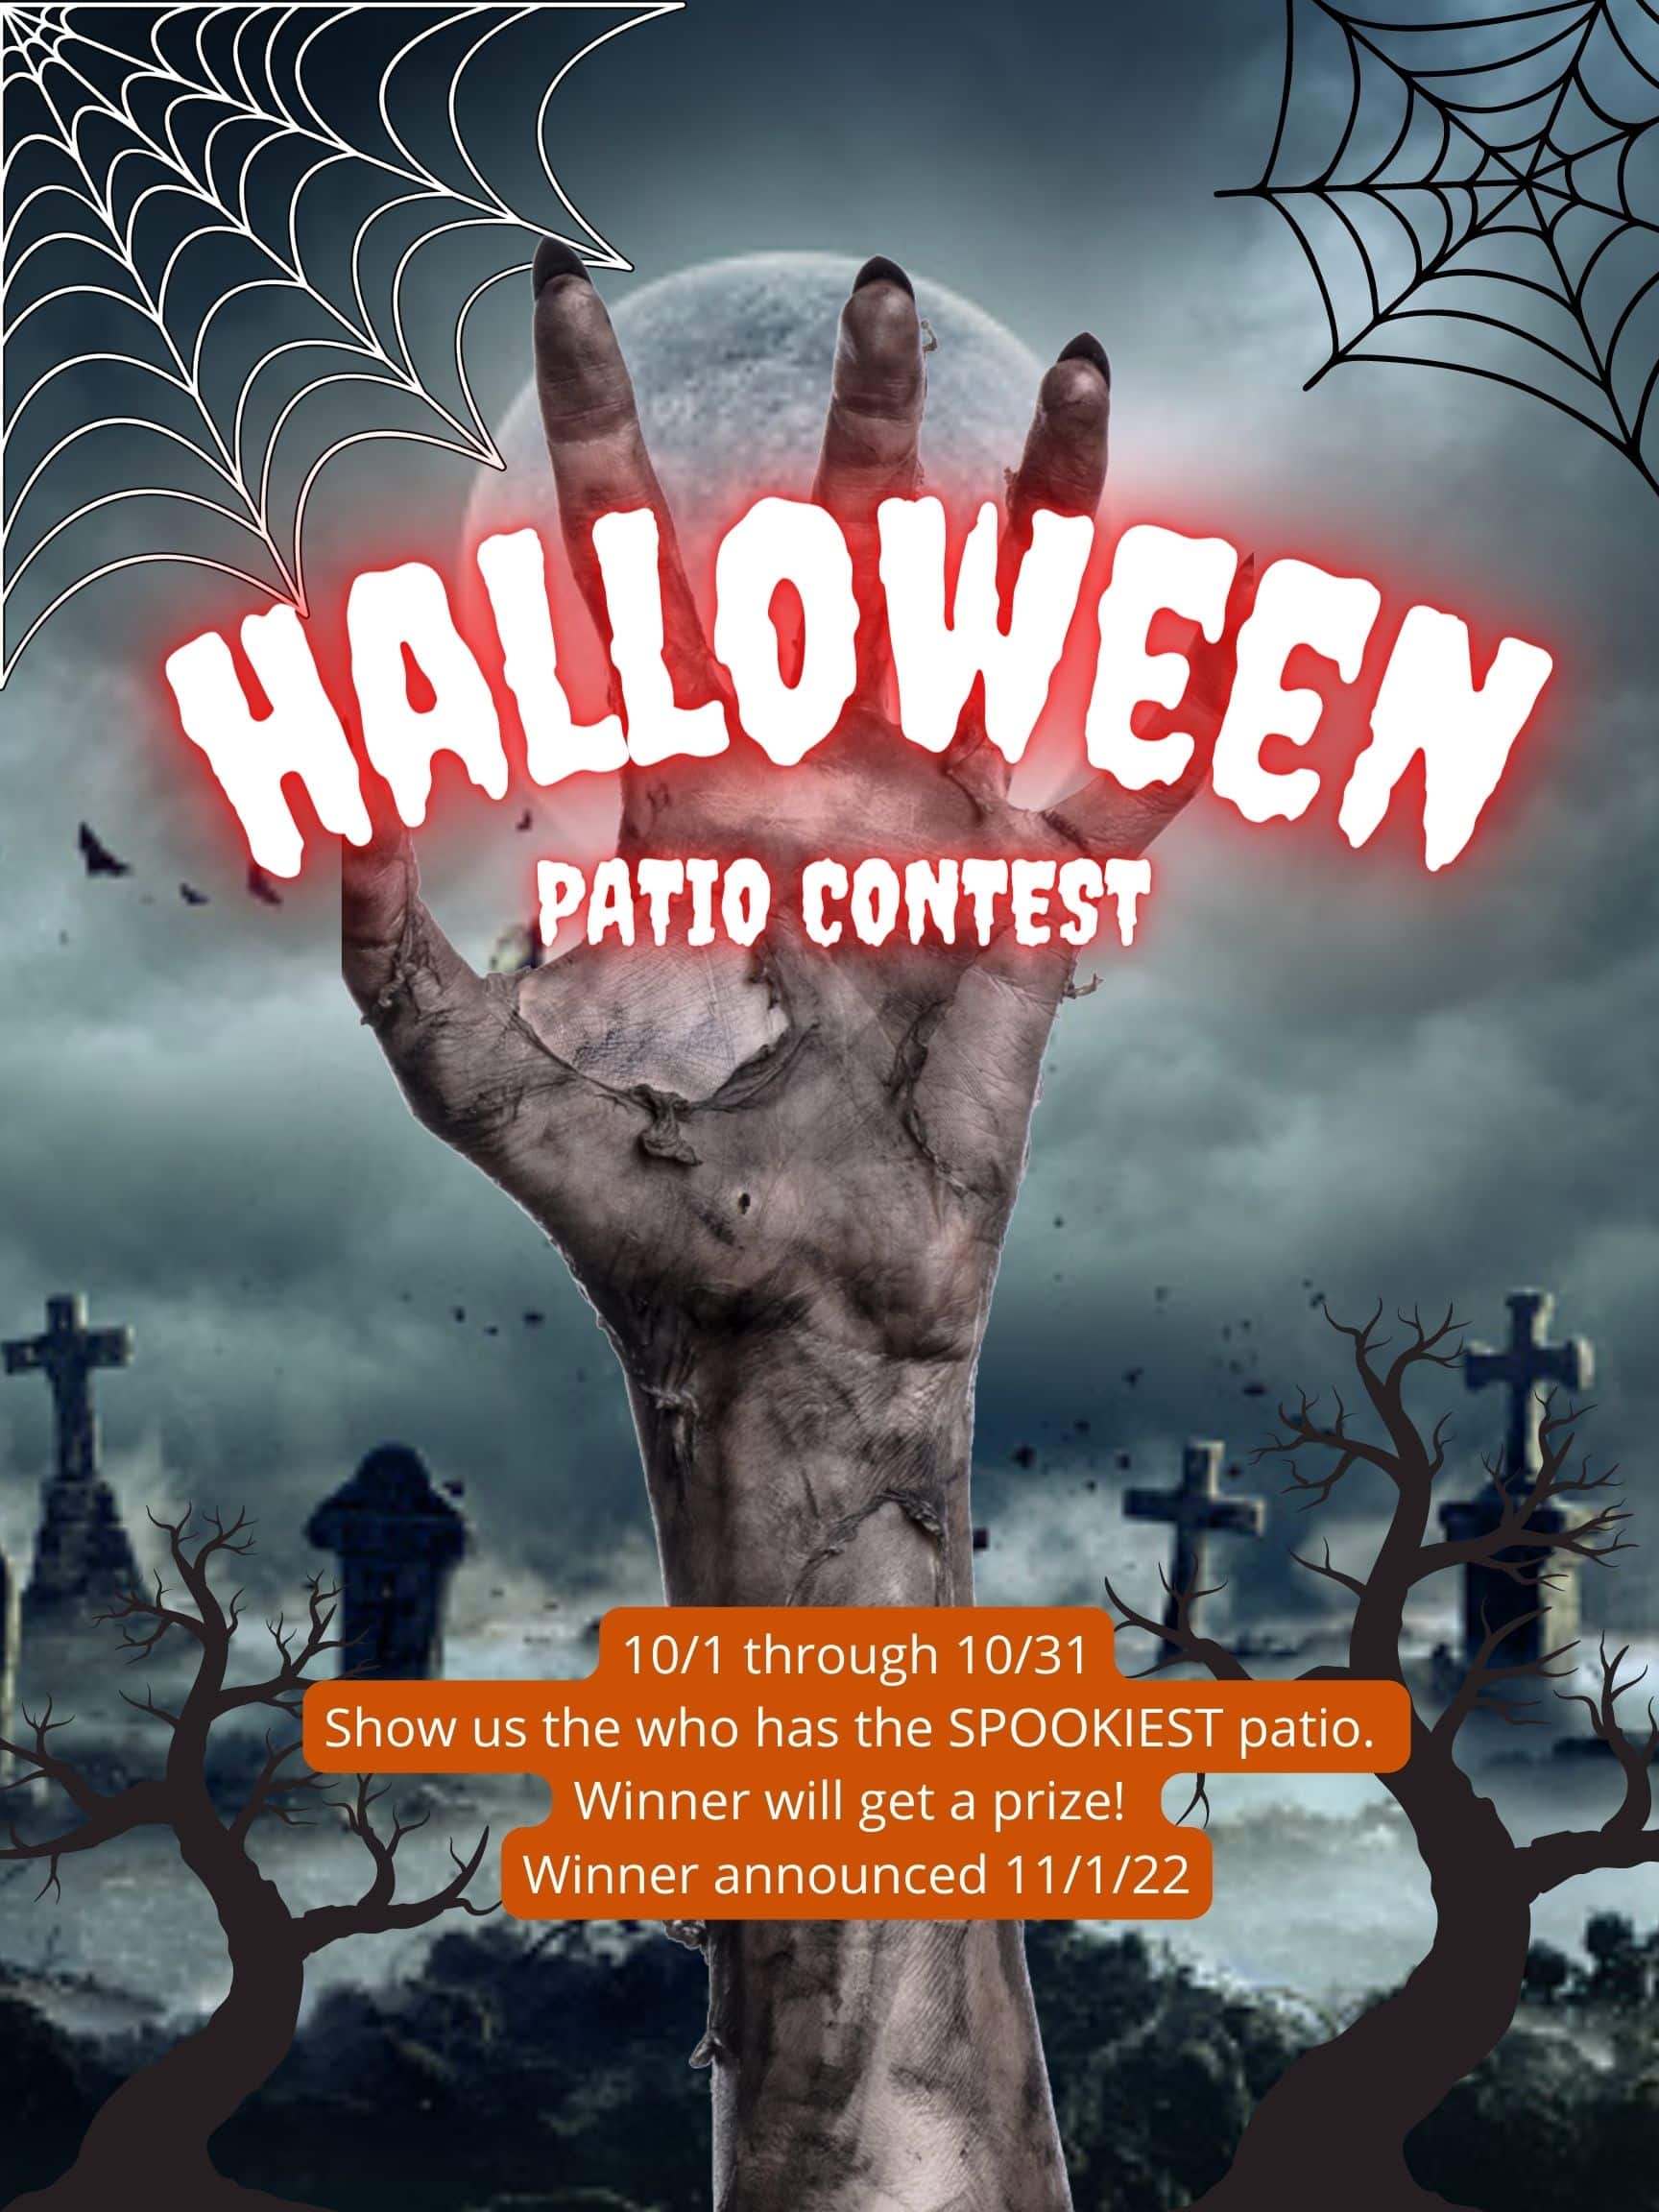 Halloween patio contest flyer for Apartments in Katy, TX.